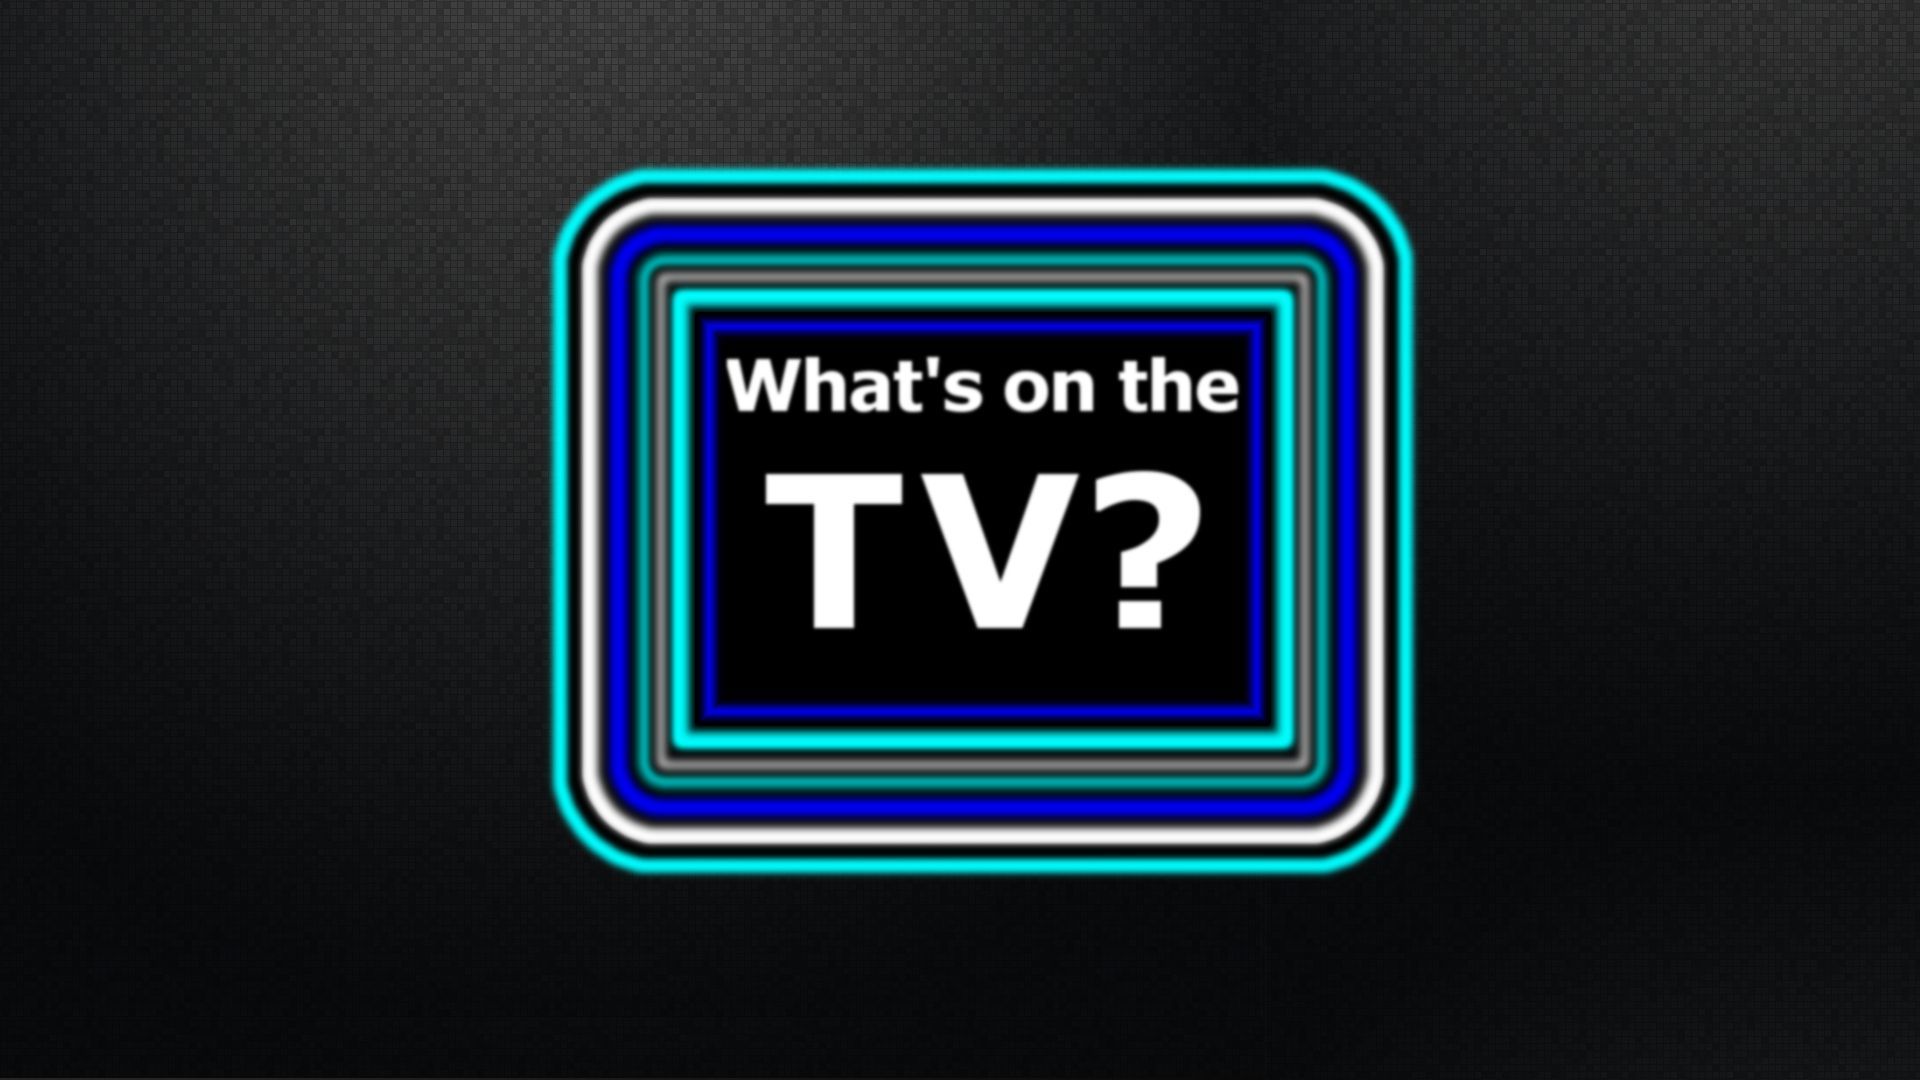 Whats on the TV Computer Wallpapers, Desktop Backgrounds